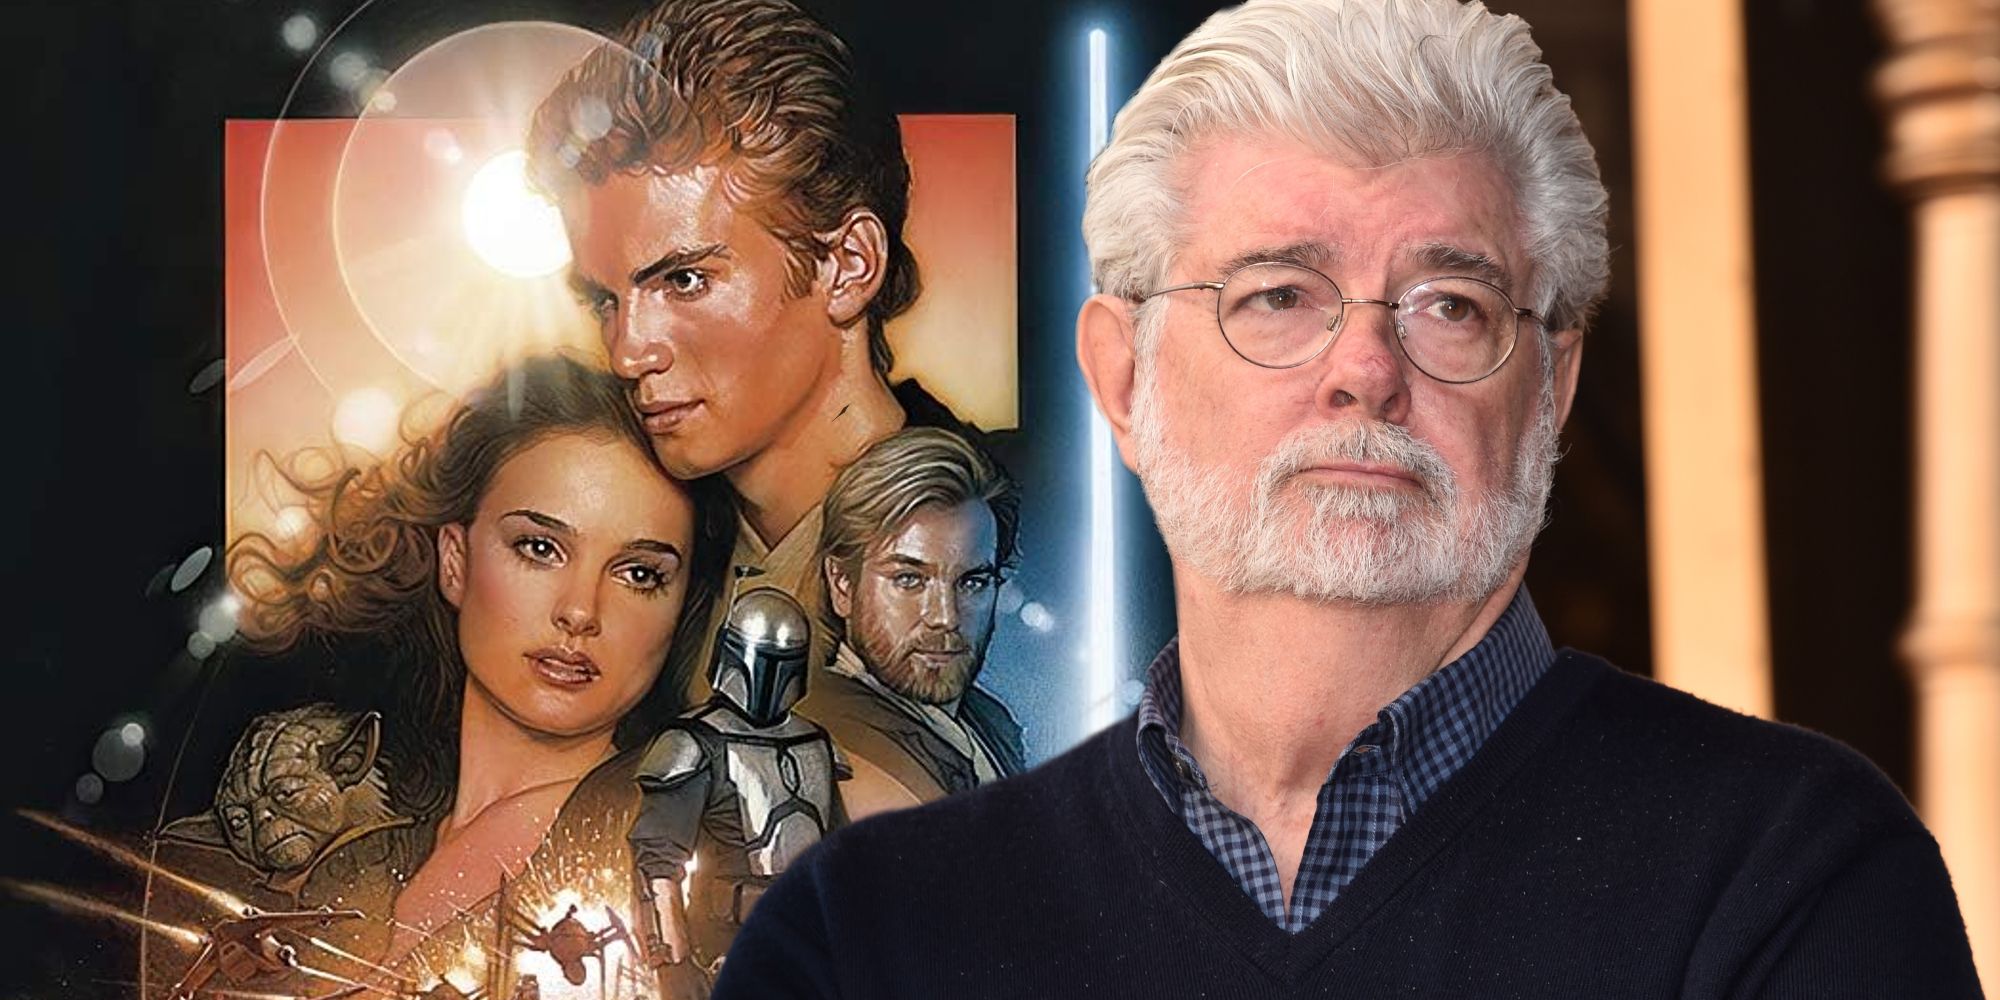 The official poster for Star Wars: Episode II - Attack of the Clones and Star Wars creator George Lucas.